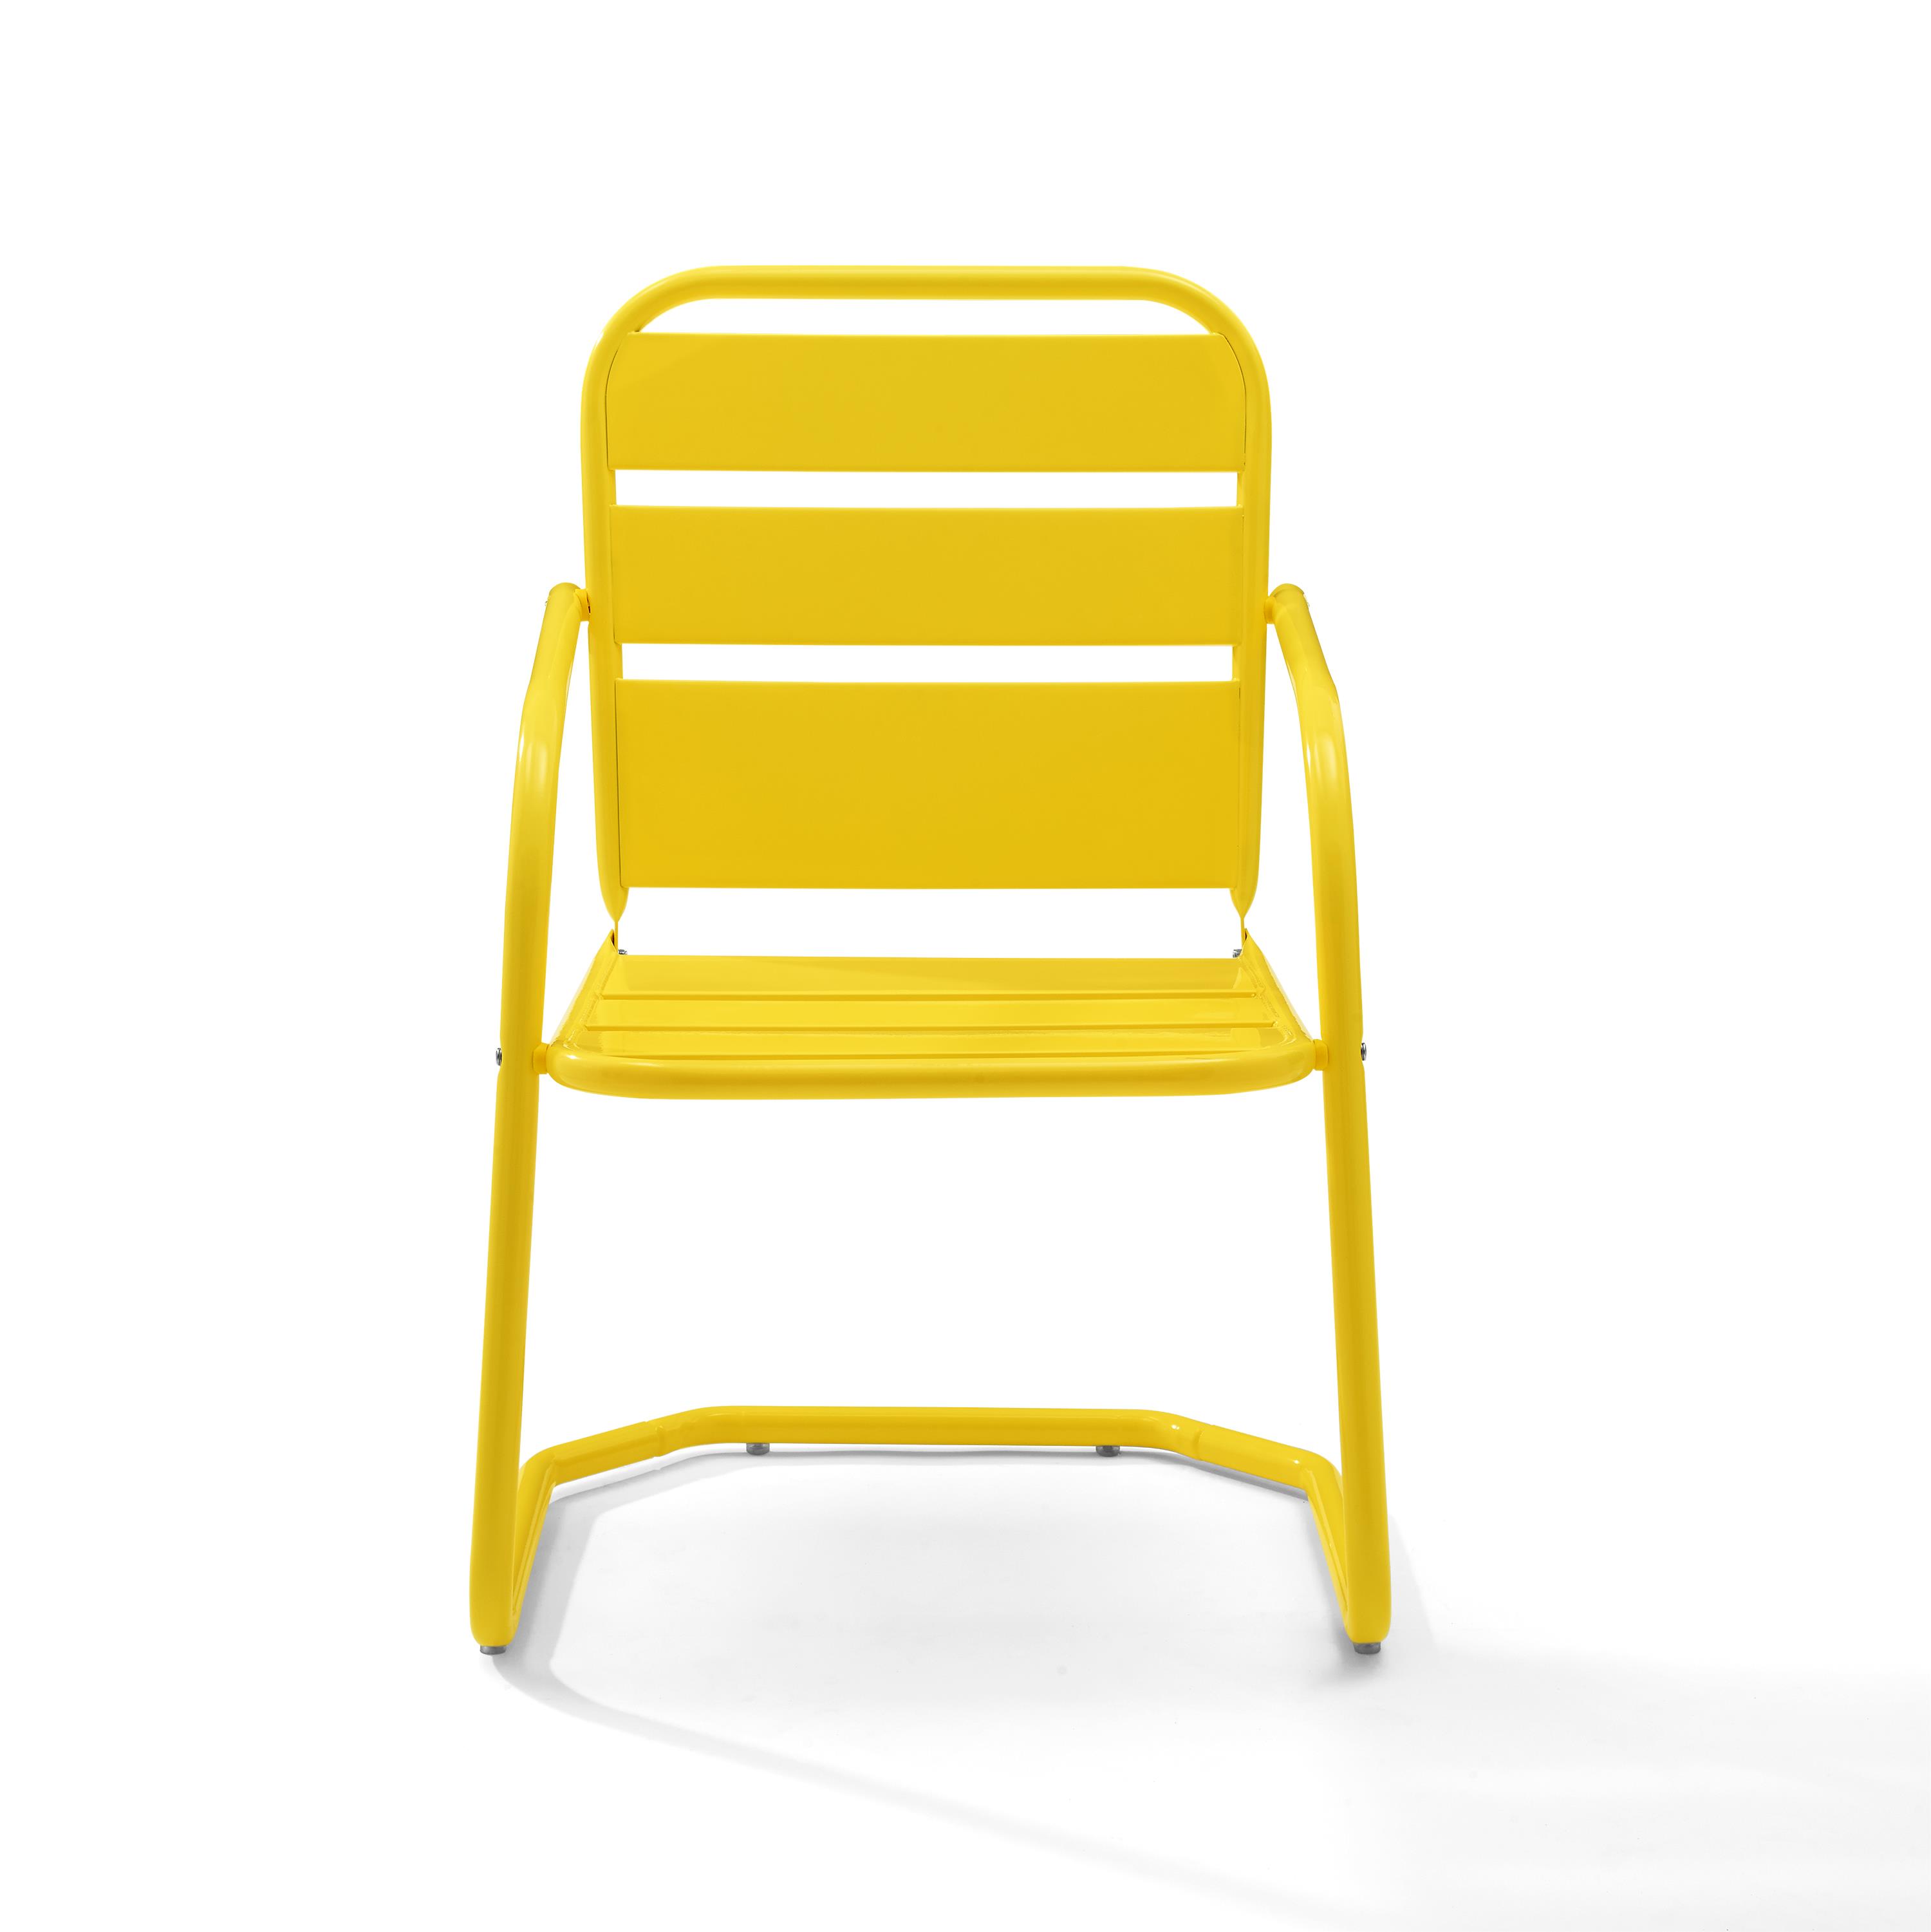 Crosley Brighton Metal Patio Chair in Yellow (Set of 2) - image 3 of 10